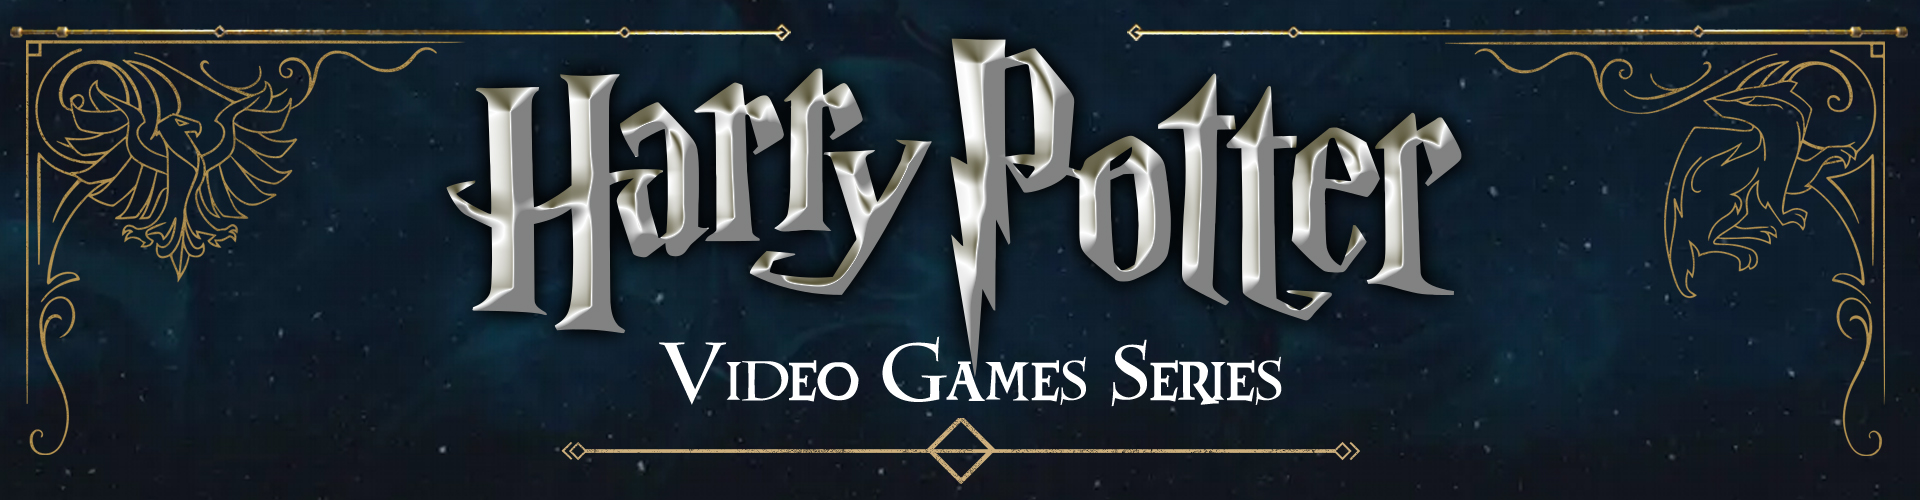 Harry Potter Video Games Serie